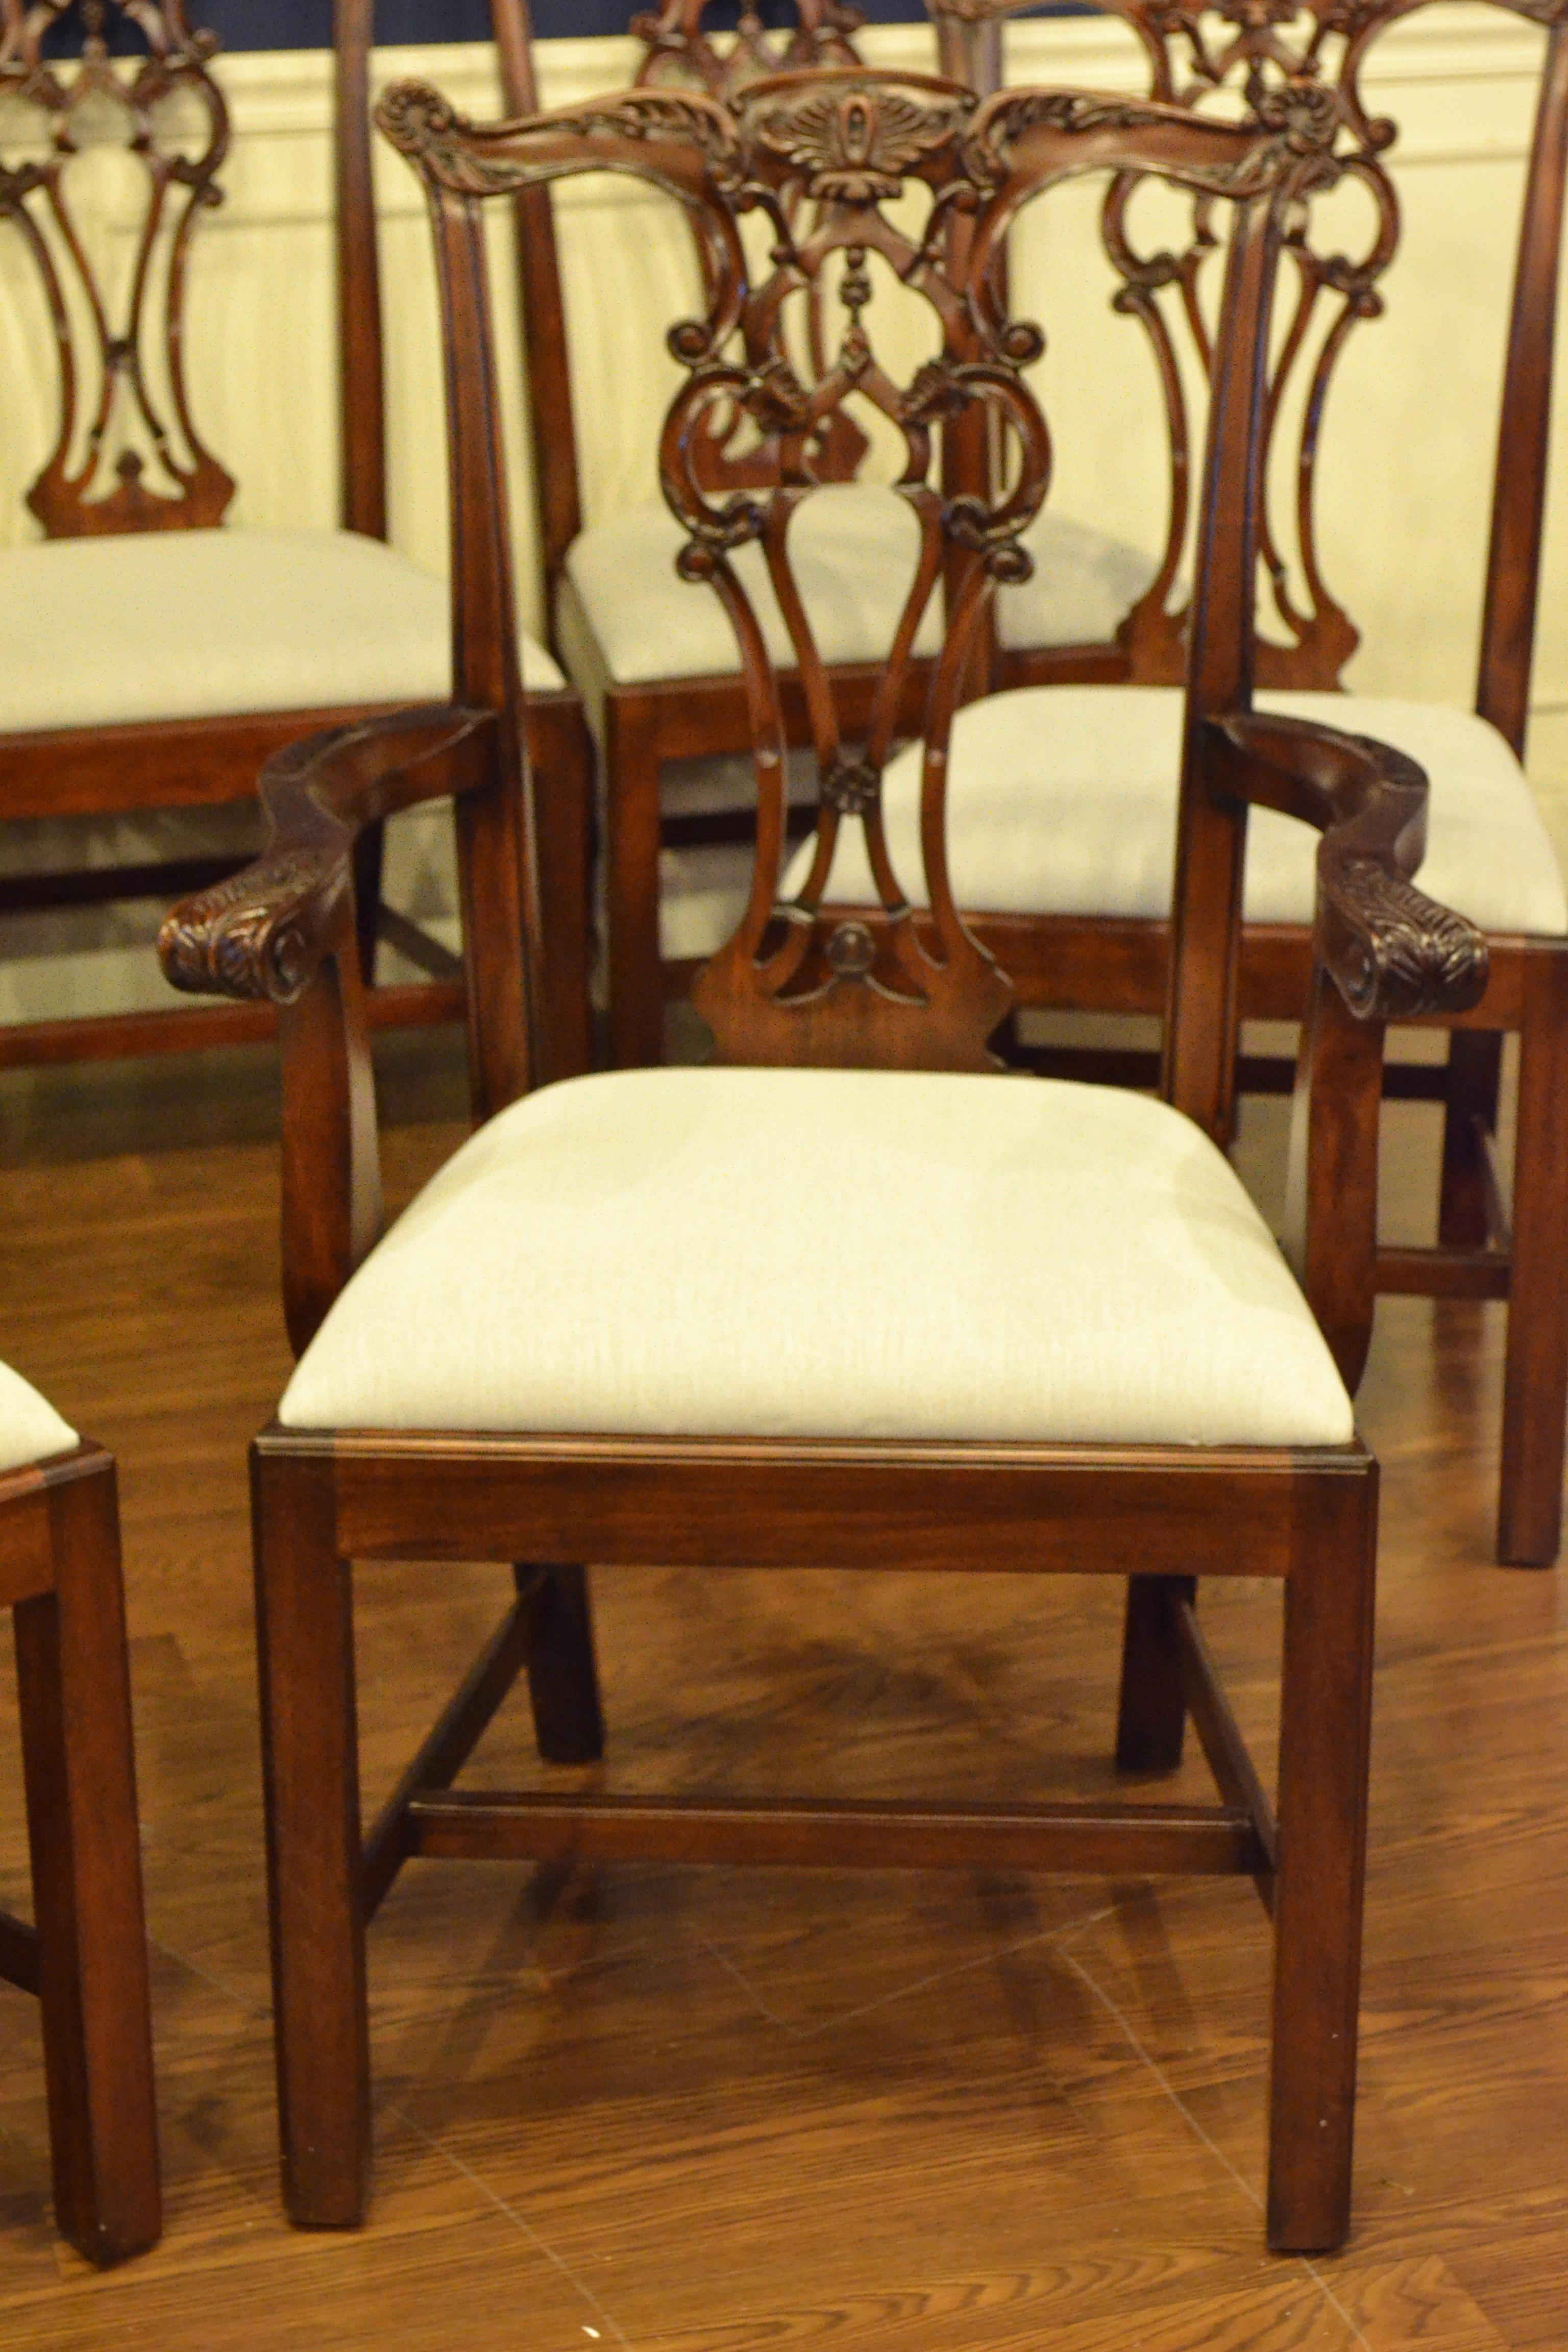 American Eight New Mahogany Chippendale Style Straight Leg Dining Chairs by Leighton Hall